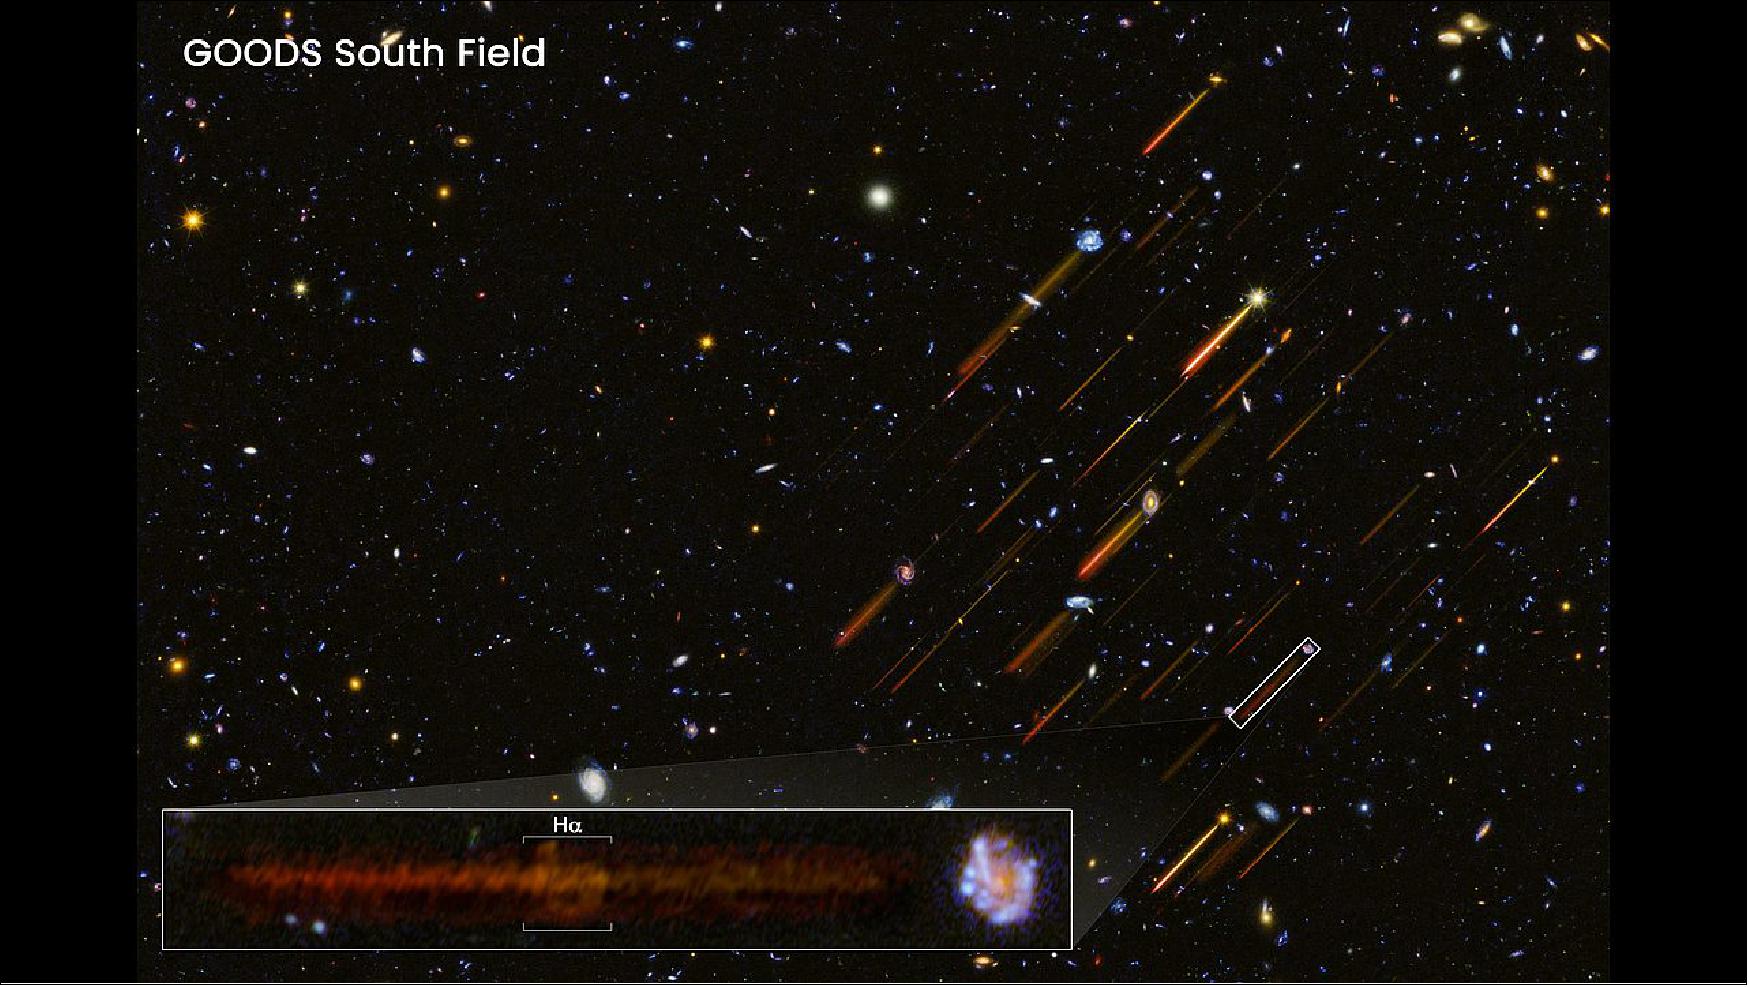 Figure 18: This portion of the Hubble GOODS-South field contains hundreds of visible galaxies. A representative sample of those galaxies on the right half of the image also have their spectra overlayed in a representation of slitless spectroscopy. By using slitless spectroscopy, a spectrum is obtained that contains both spatial and wavelength information. For example, the inset highlights a spiral galaxy that shines brightly in the emission line of hydrogen-alpha (Hα) as well as in broad starlight (the horizontal strip of light). Its spiral shape is traced by the Hα portion of the spectrum. By combining imaging and spectroscopy, astronomers can learn much more than from each technique alone [image credit: NASA, ESA; image processing: Joseph DePasquale (STScI); acknowledgement: University of Geneva, Pascal Oesch (University of Geneva), Mireia Montes (UNSW)]